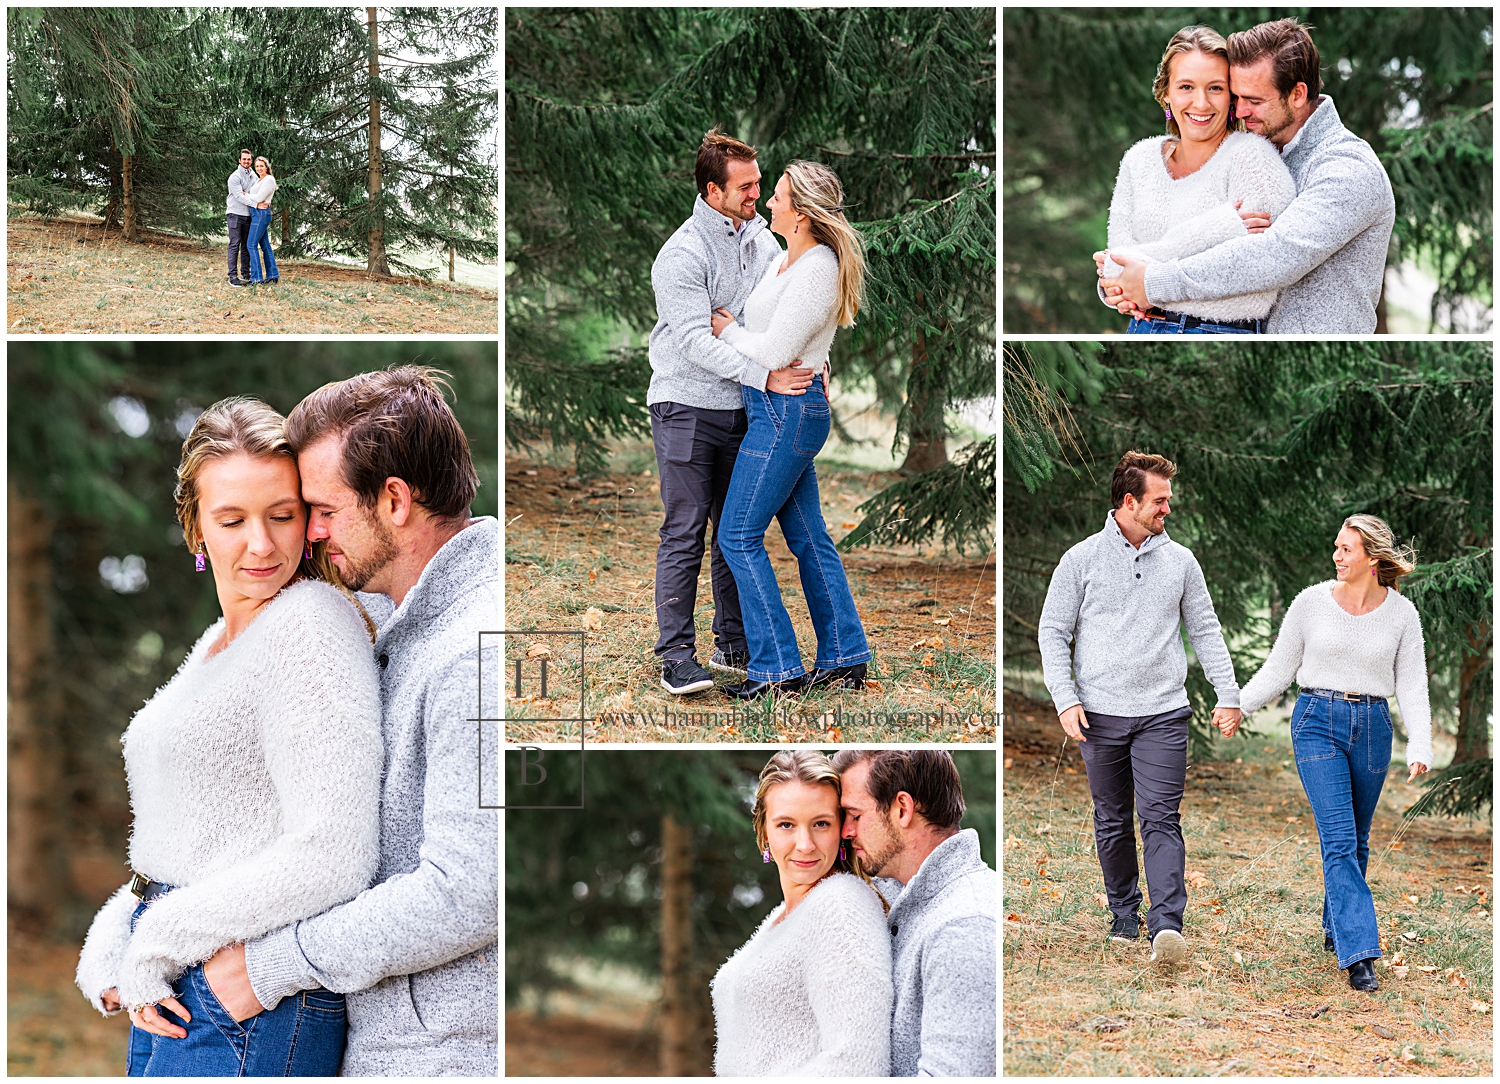 Women in white sweater and man in grey pose for windy engagement photos